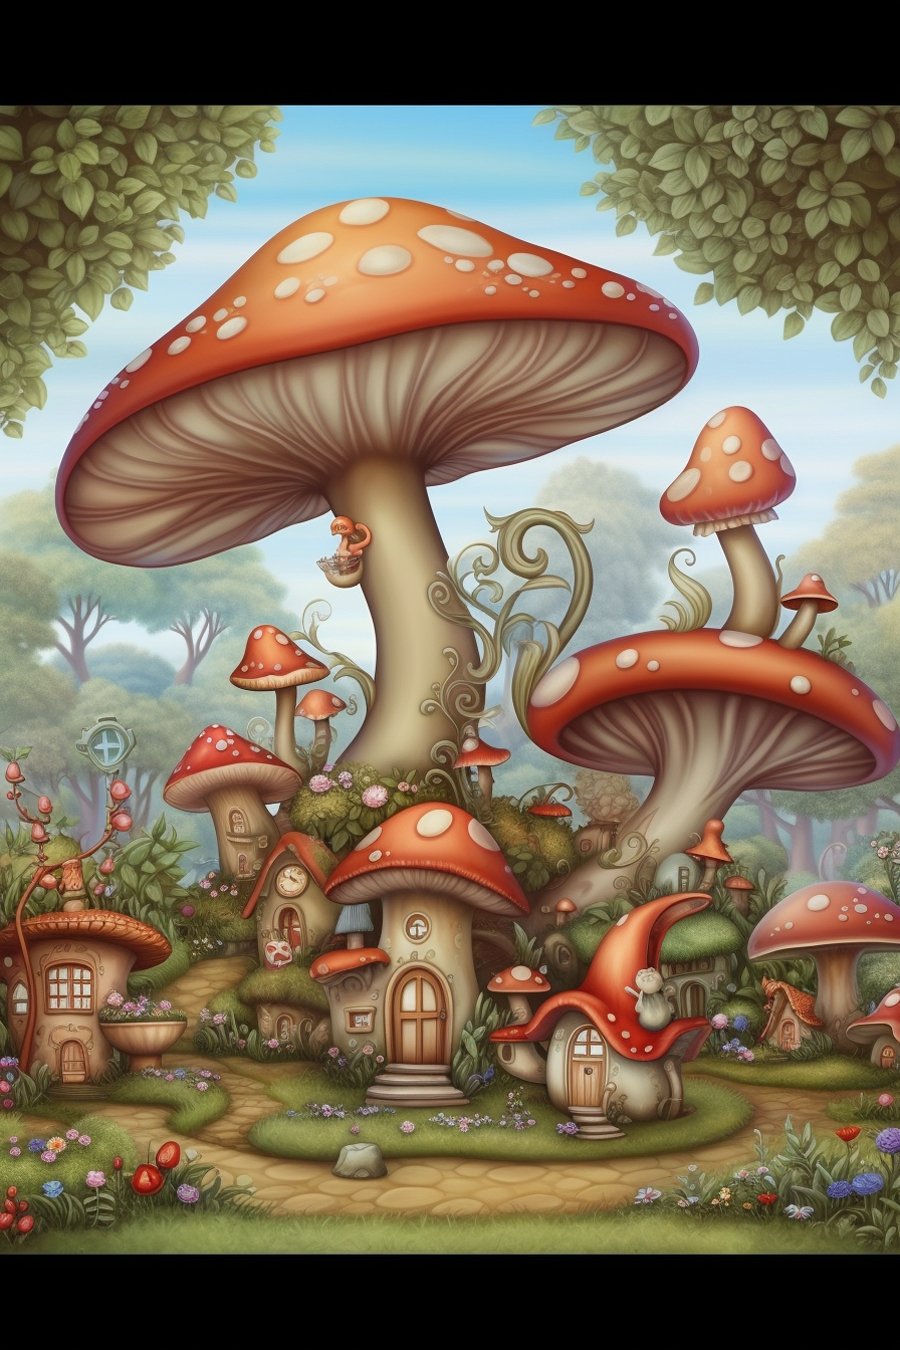 An illustration of a mushroom village in the forest.